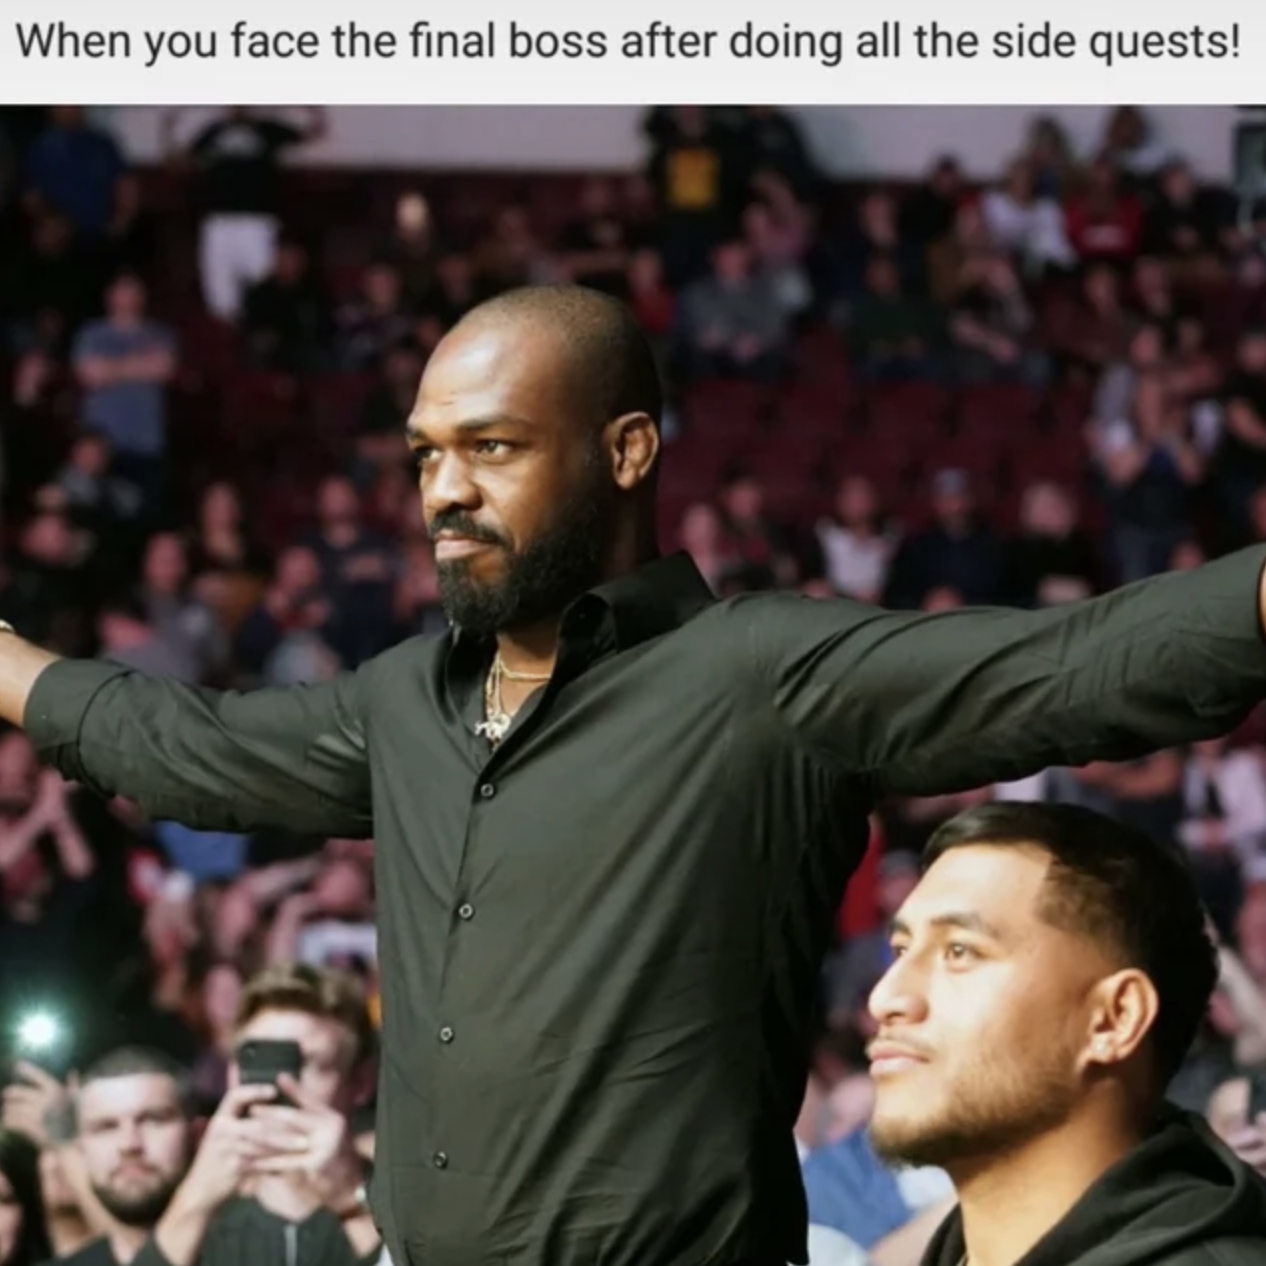 gaming memes - crowd - When you face the final boss after doing all the side quests!